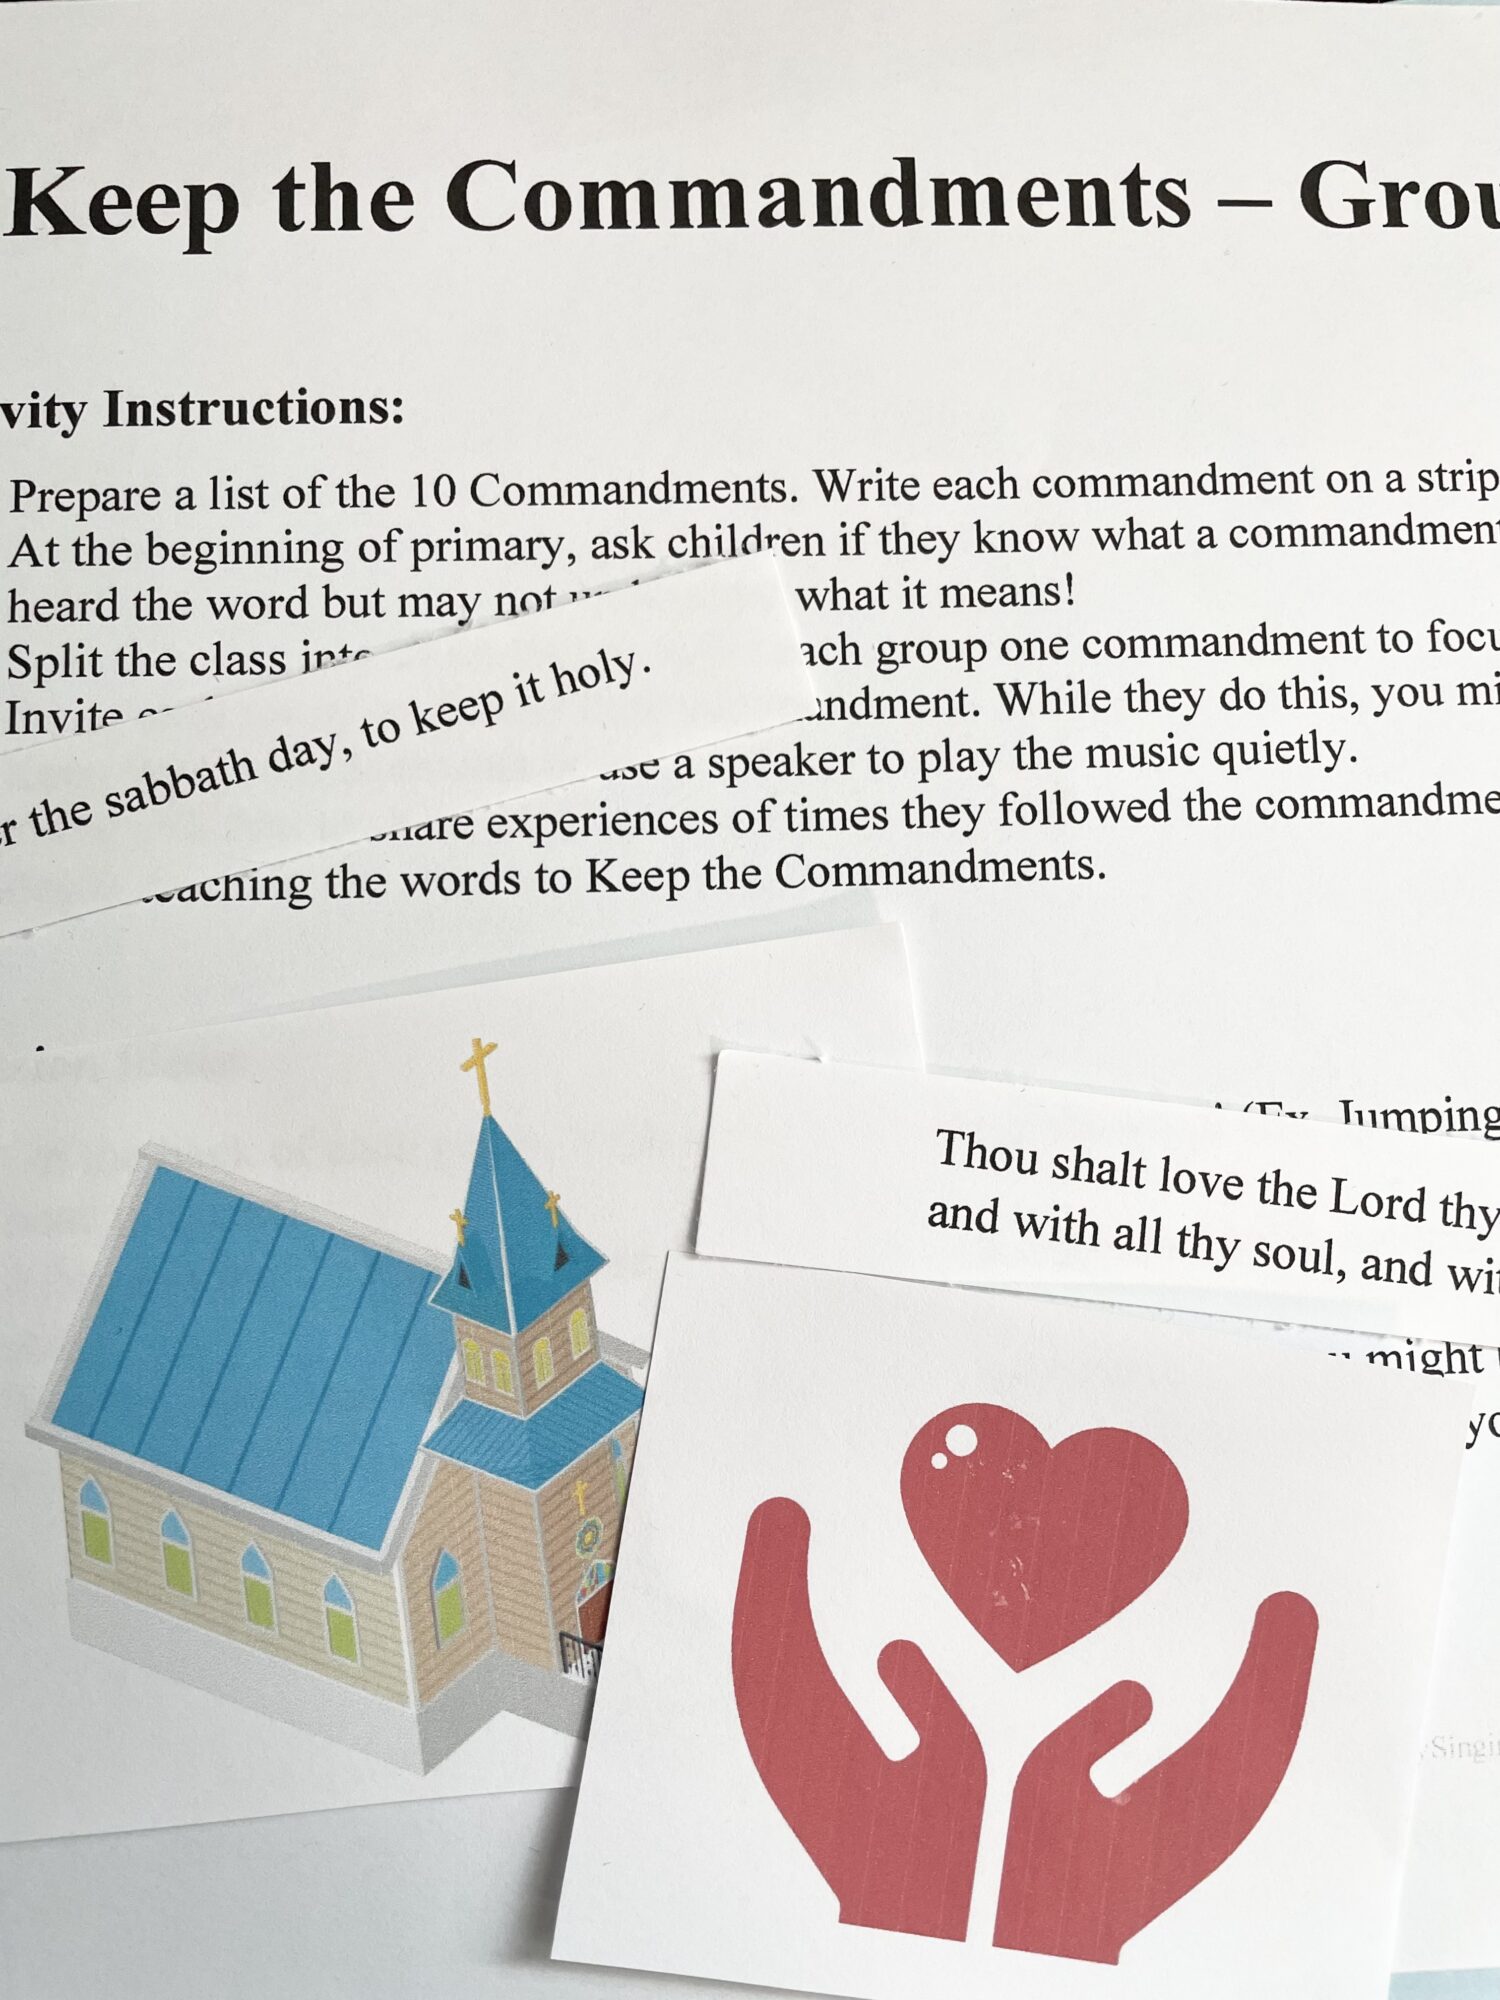 Keep the Commandments - Group Stories Activity Easy singing time ideas for Primary Music Leaders IMG 6201